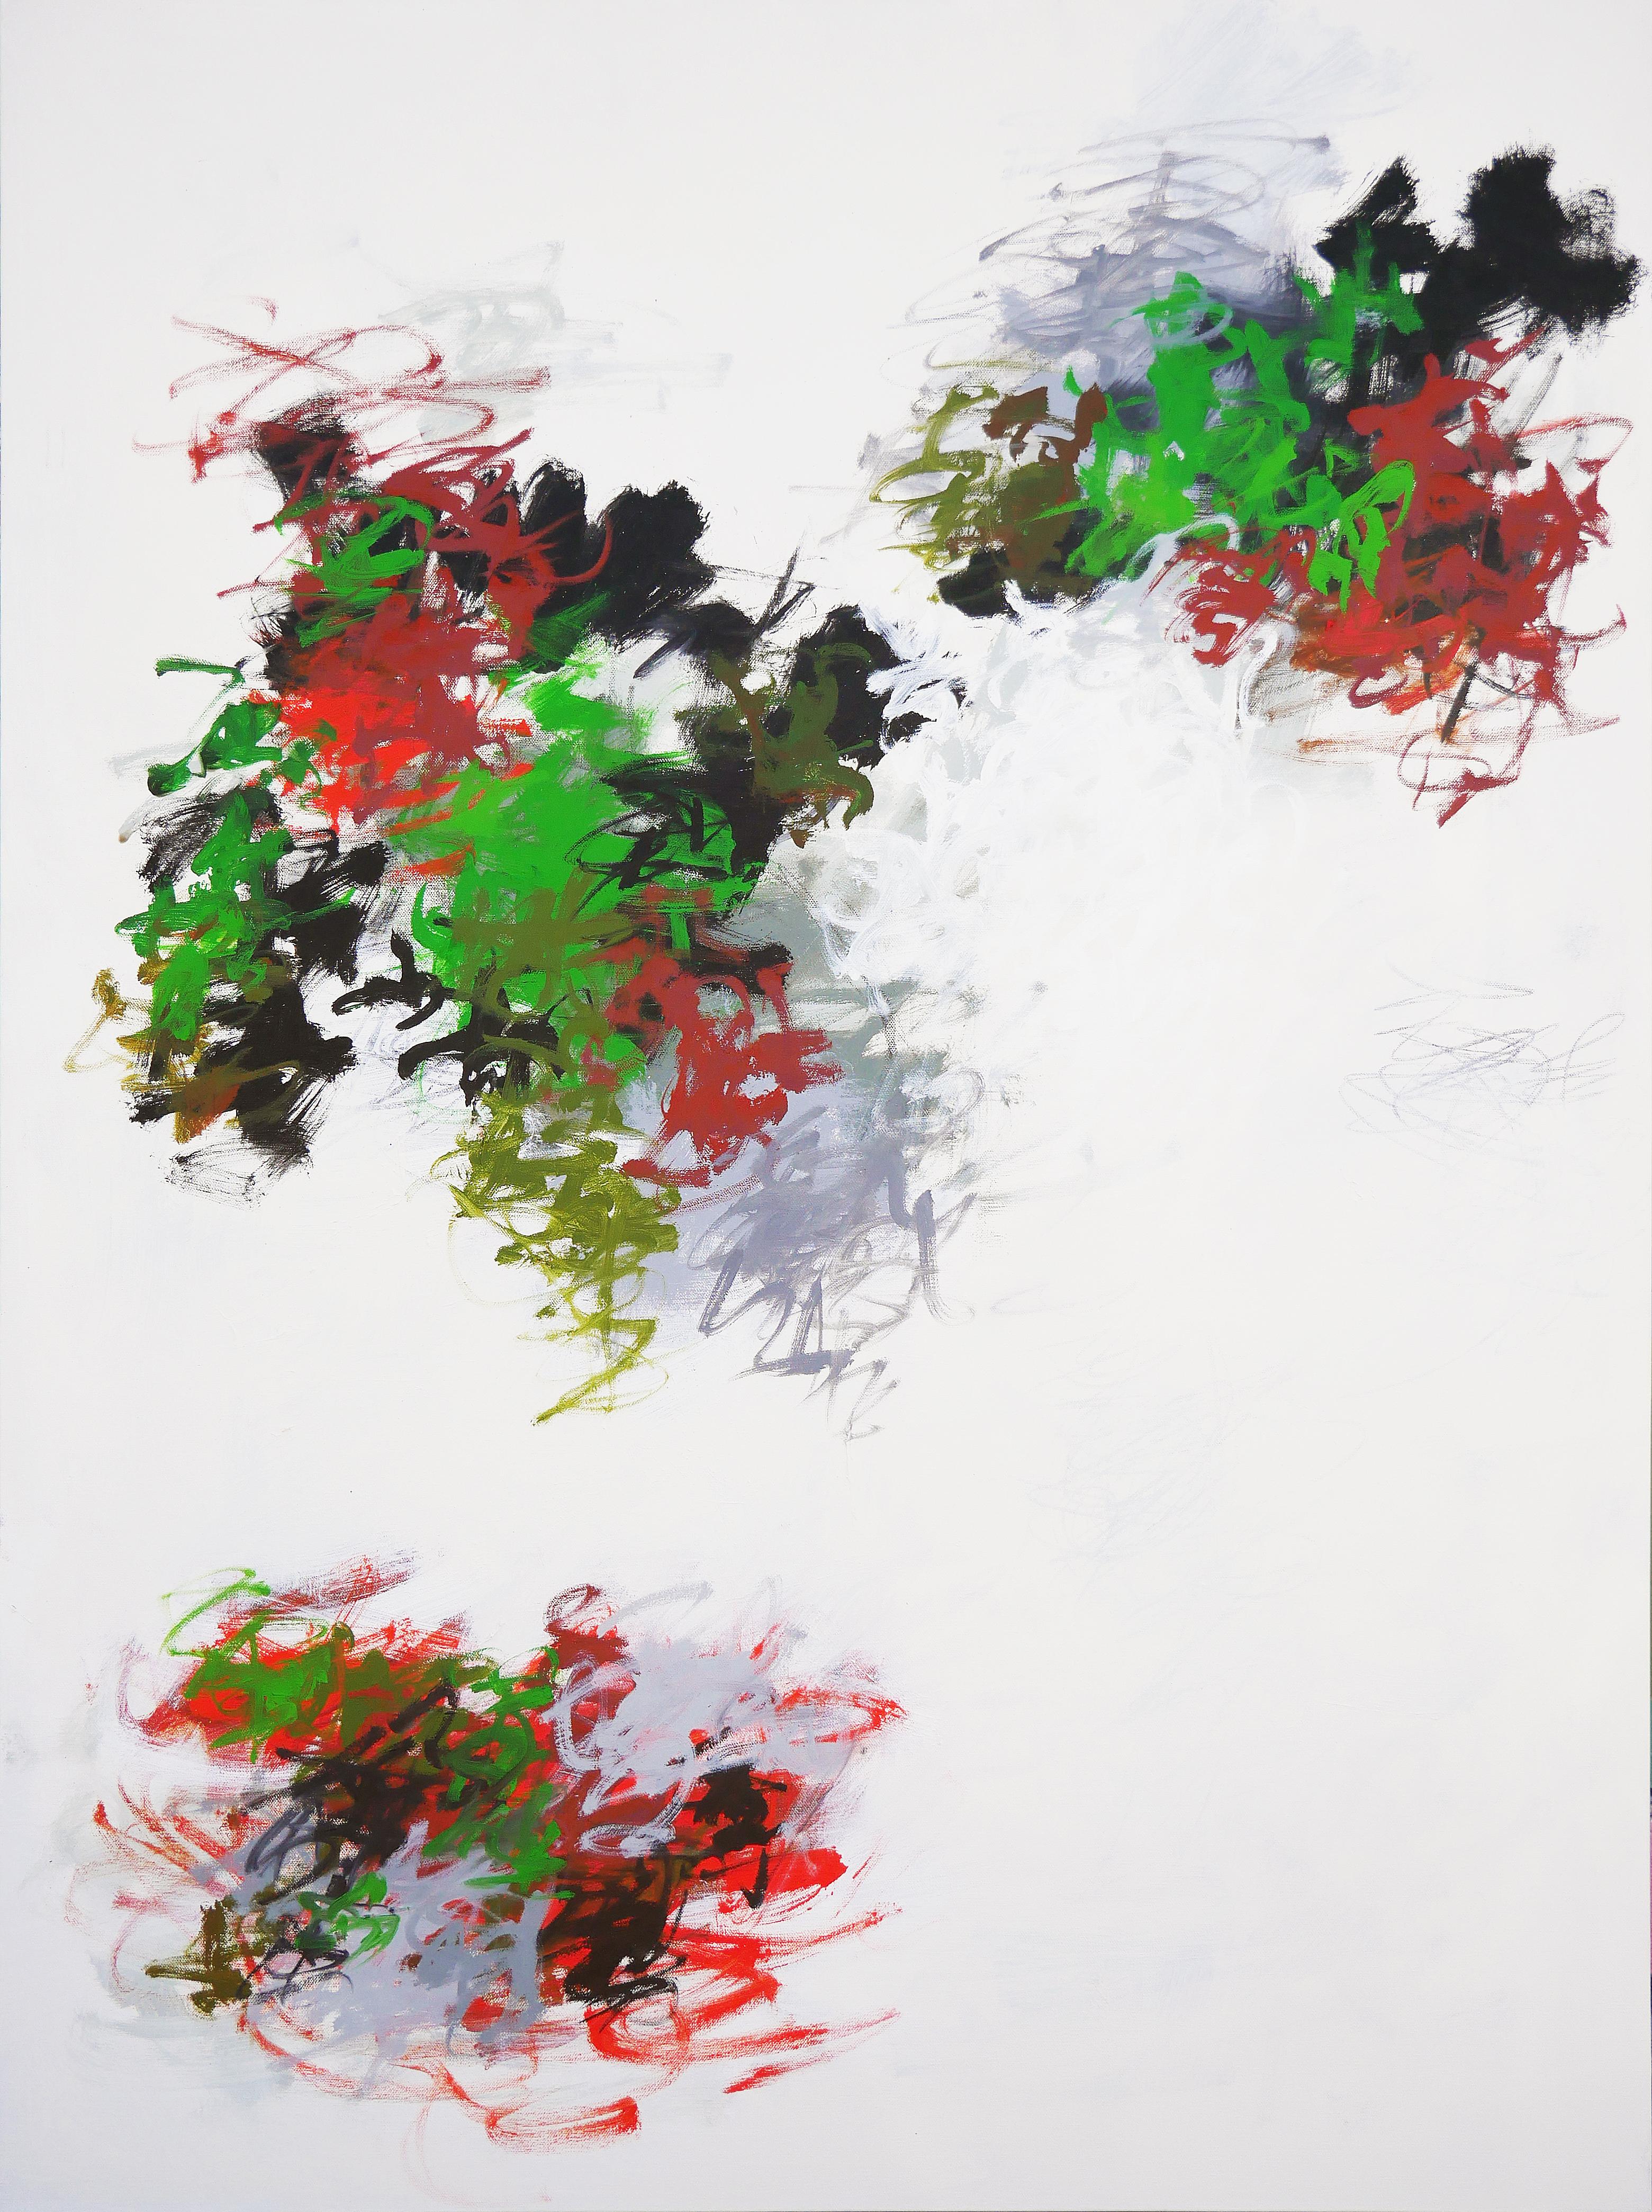 Gerald Syler Abstract Painting - "Untitled 60" Large Red, Black, and Green Abstract Expressionist Painting